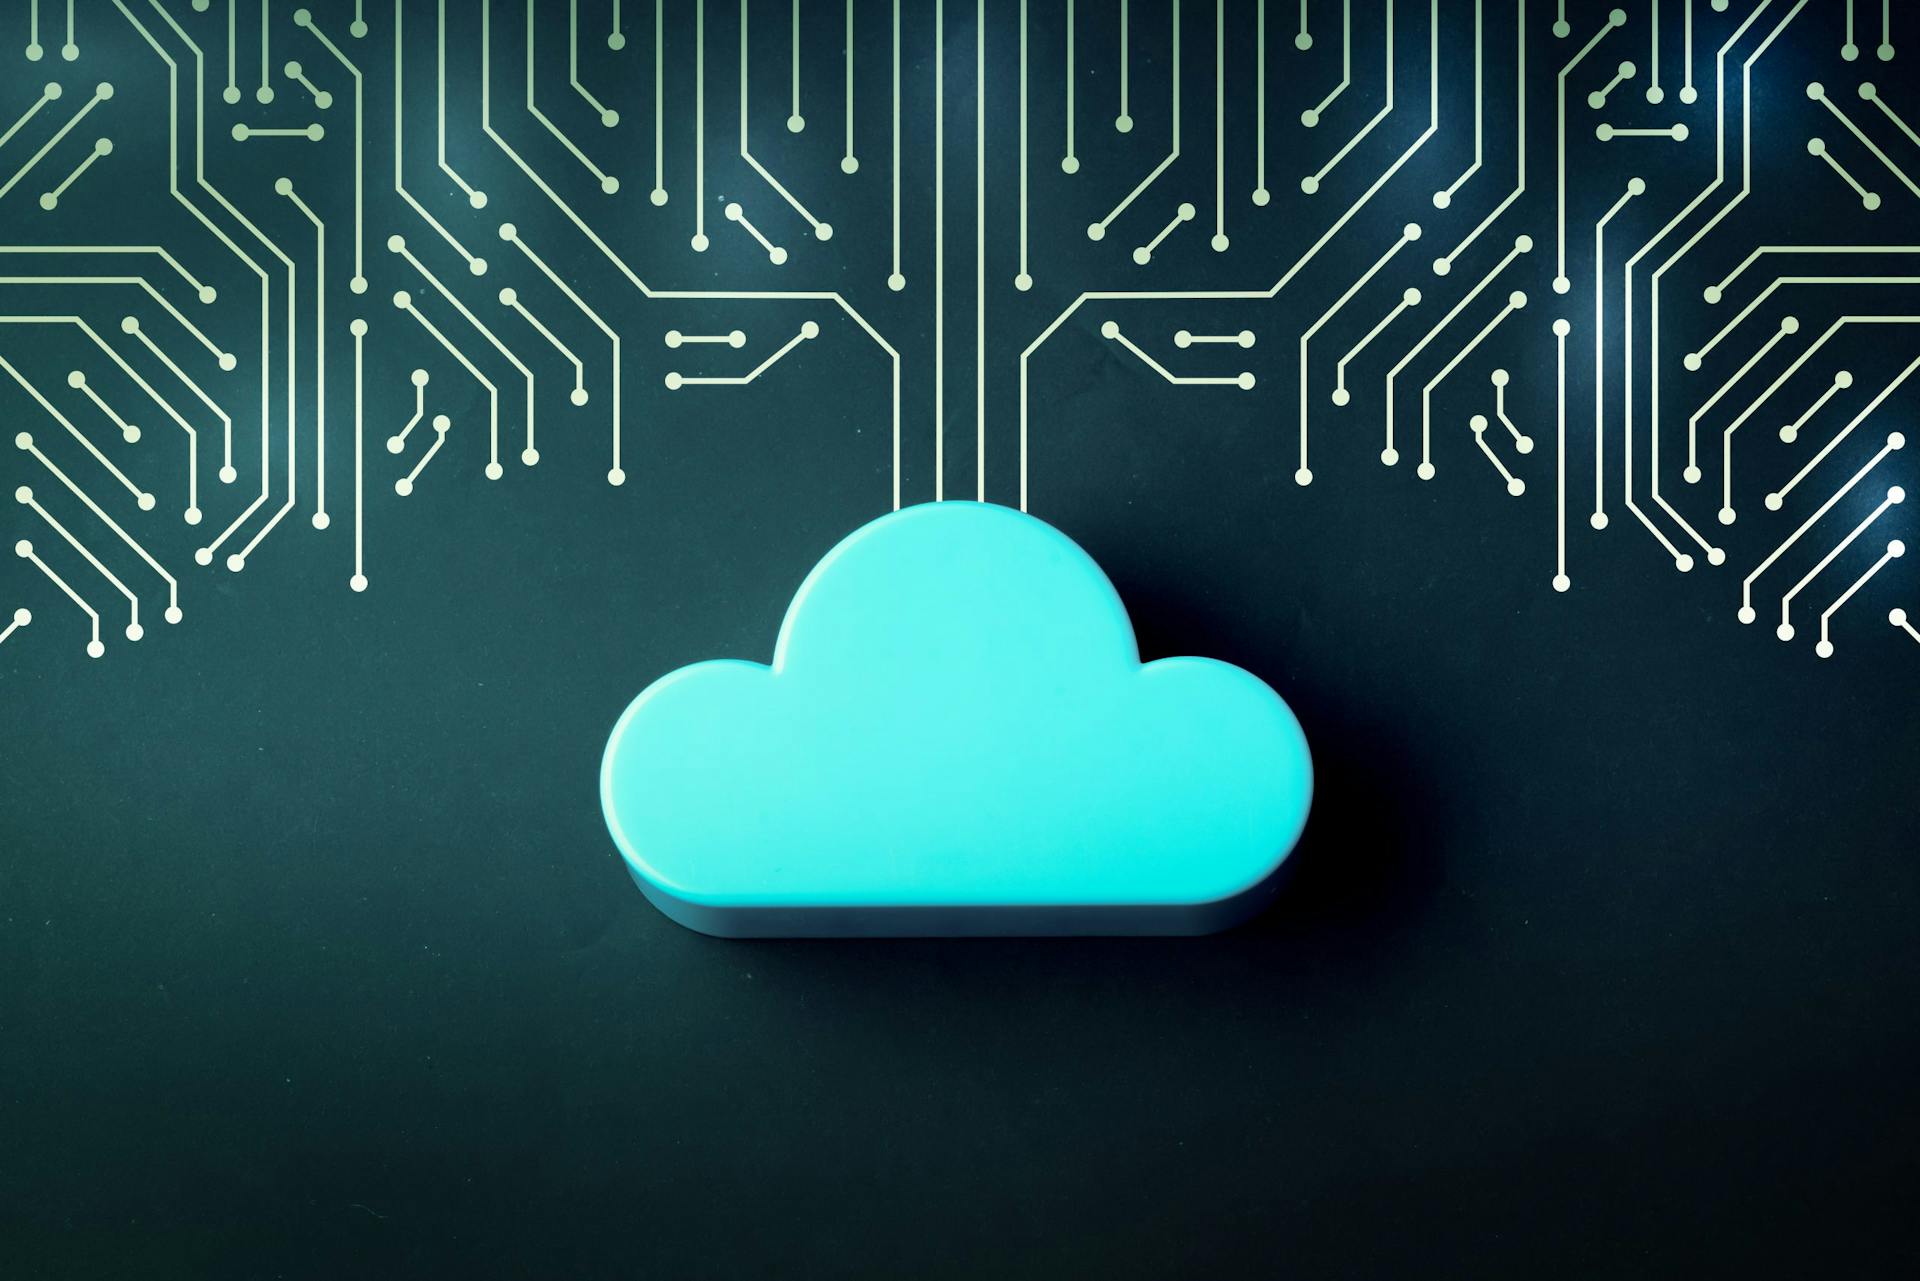 Cloud icon on abstract background mainboard illustration